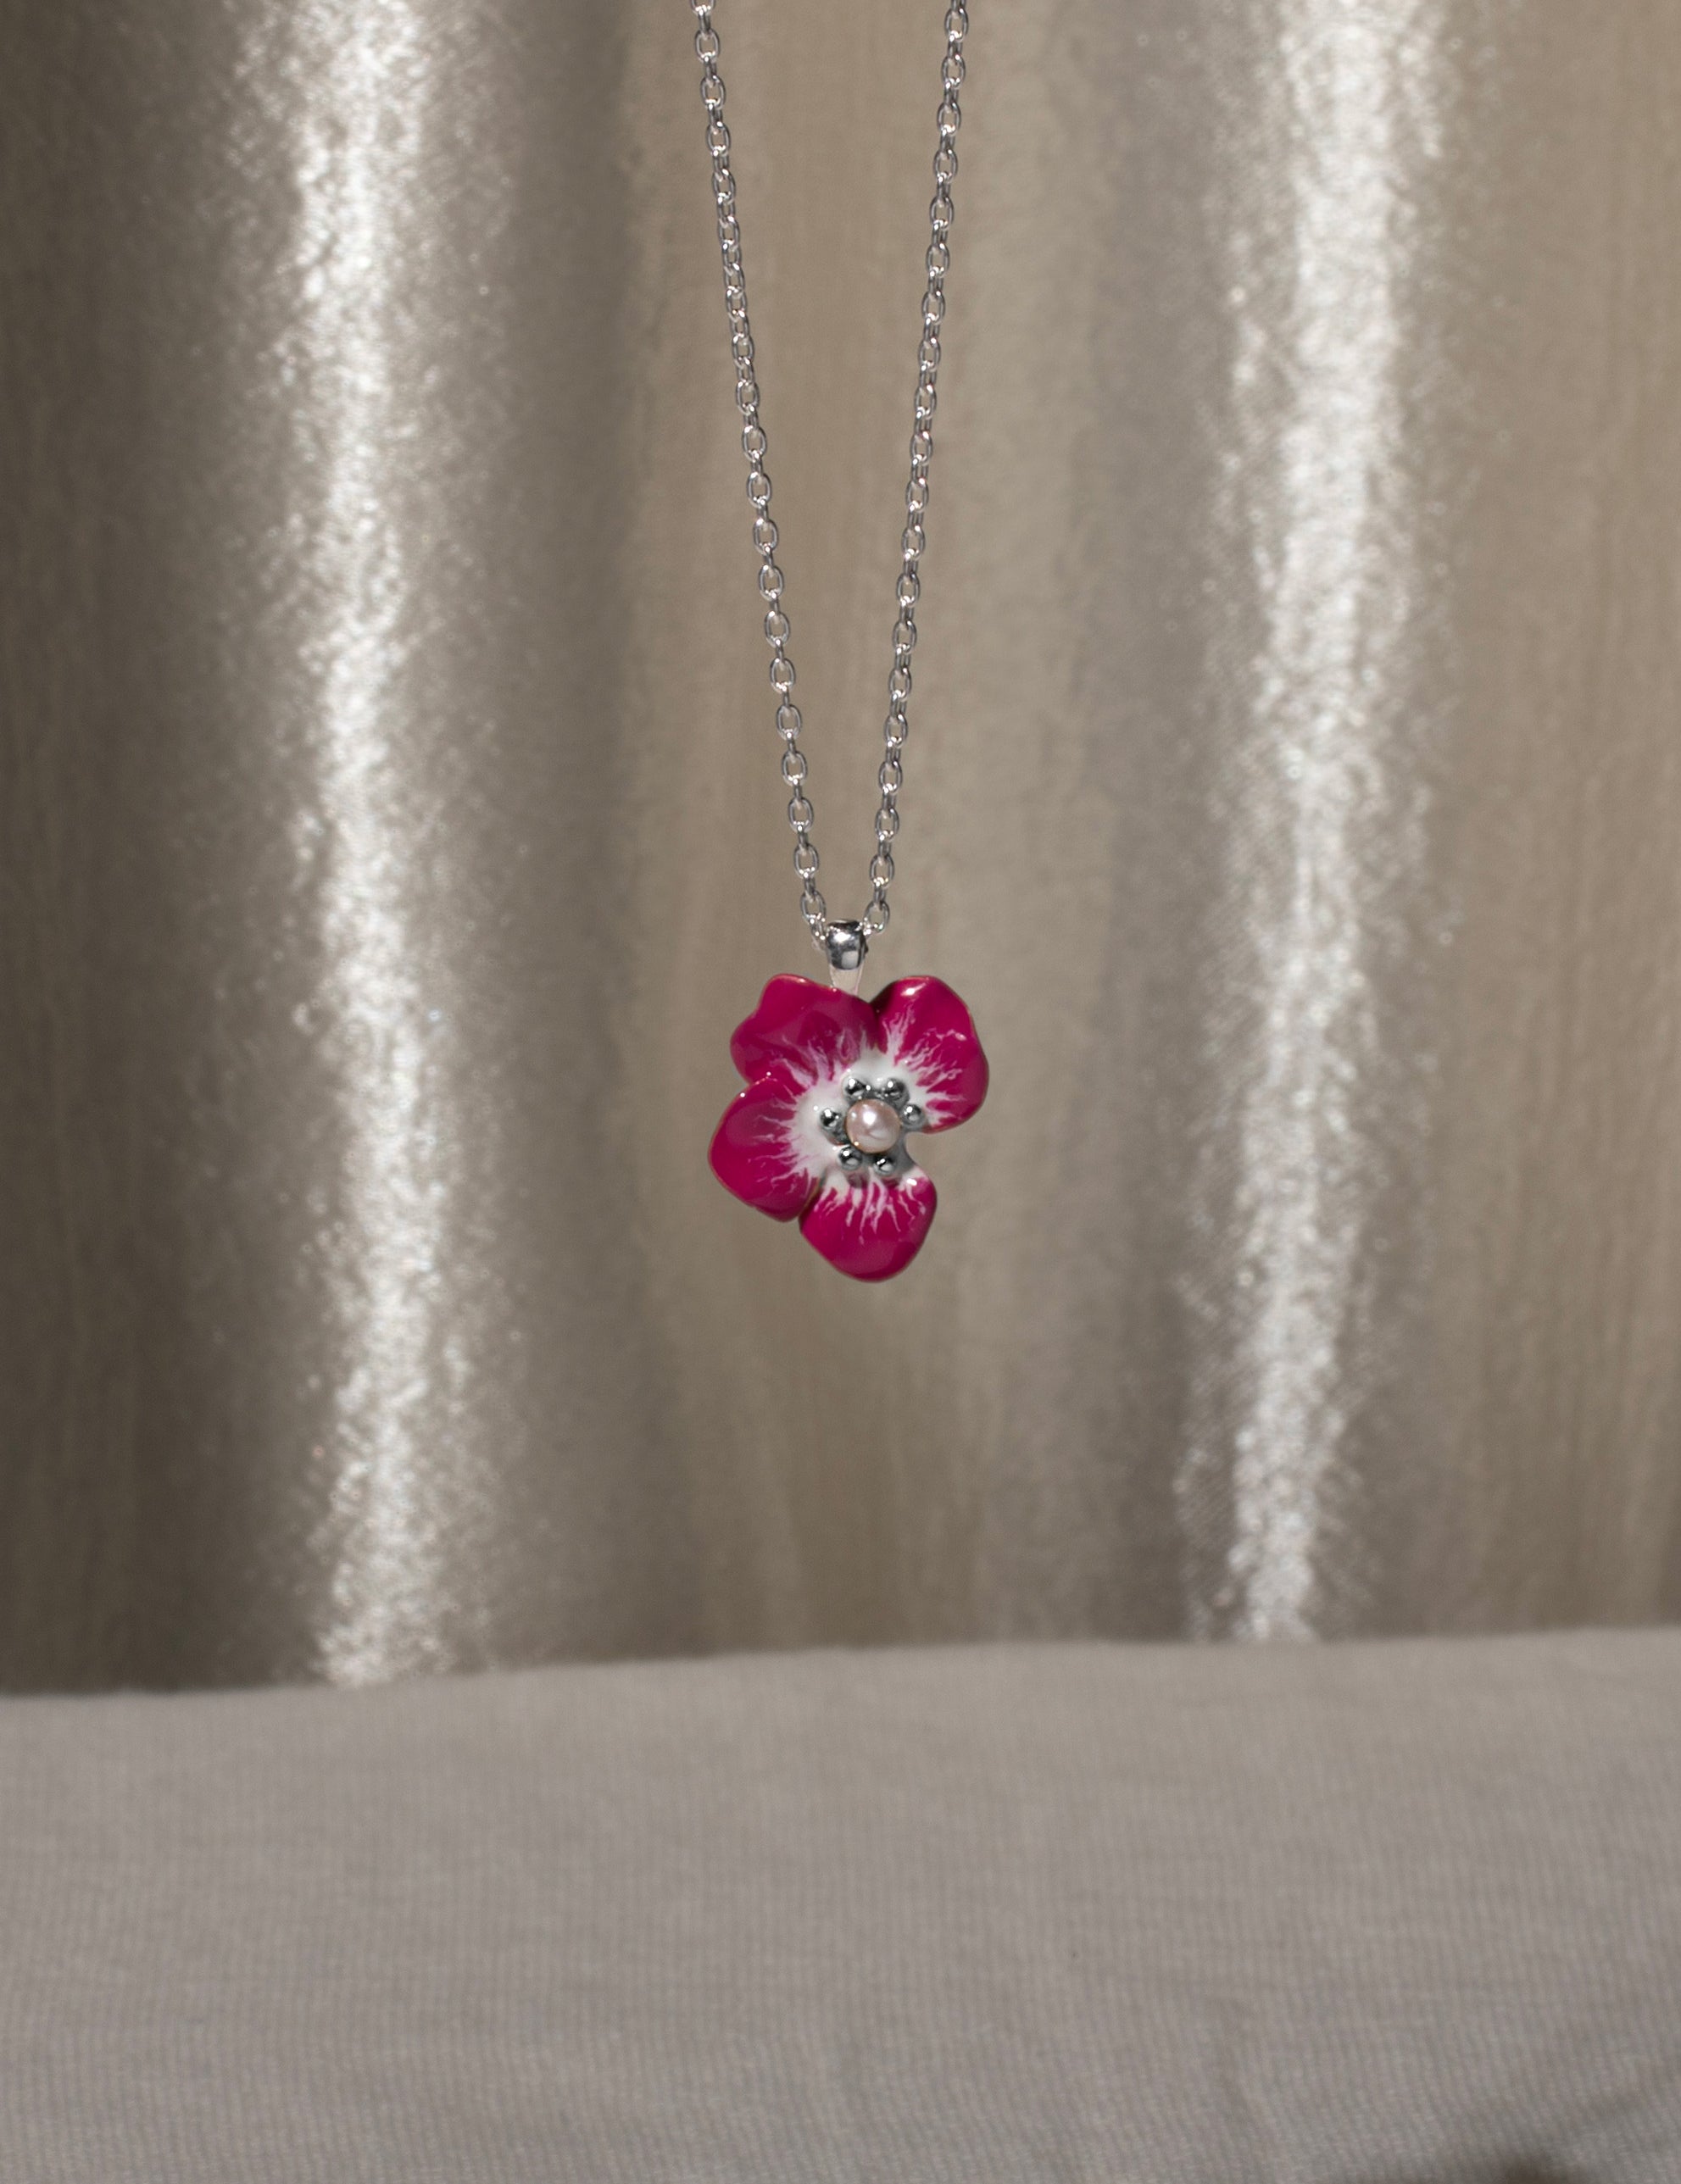 Part of Me necklace rose baby